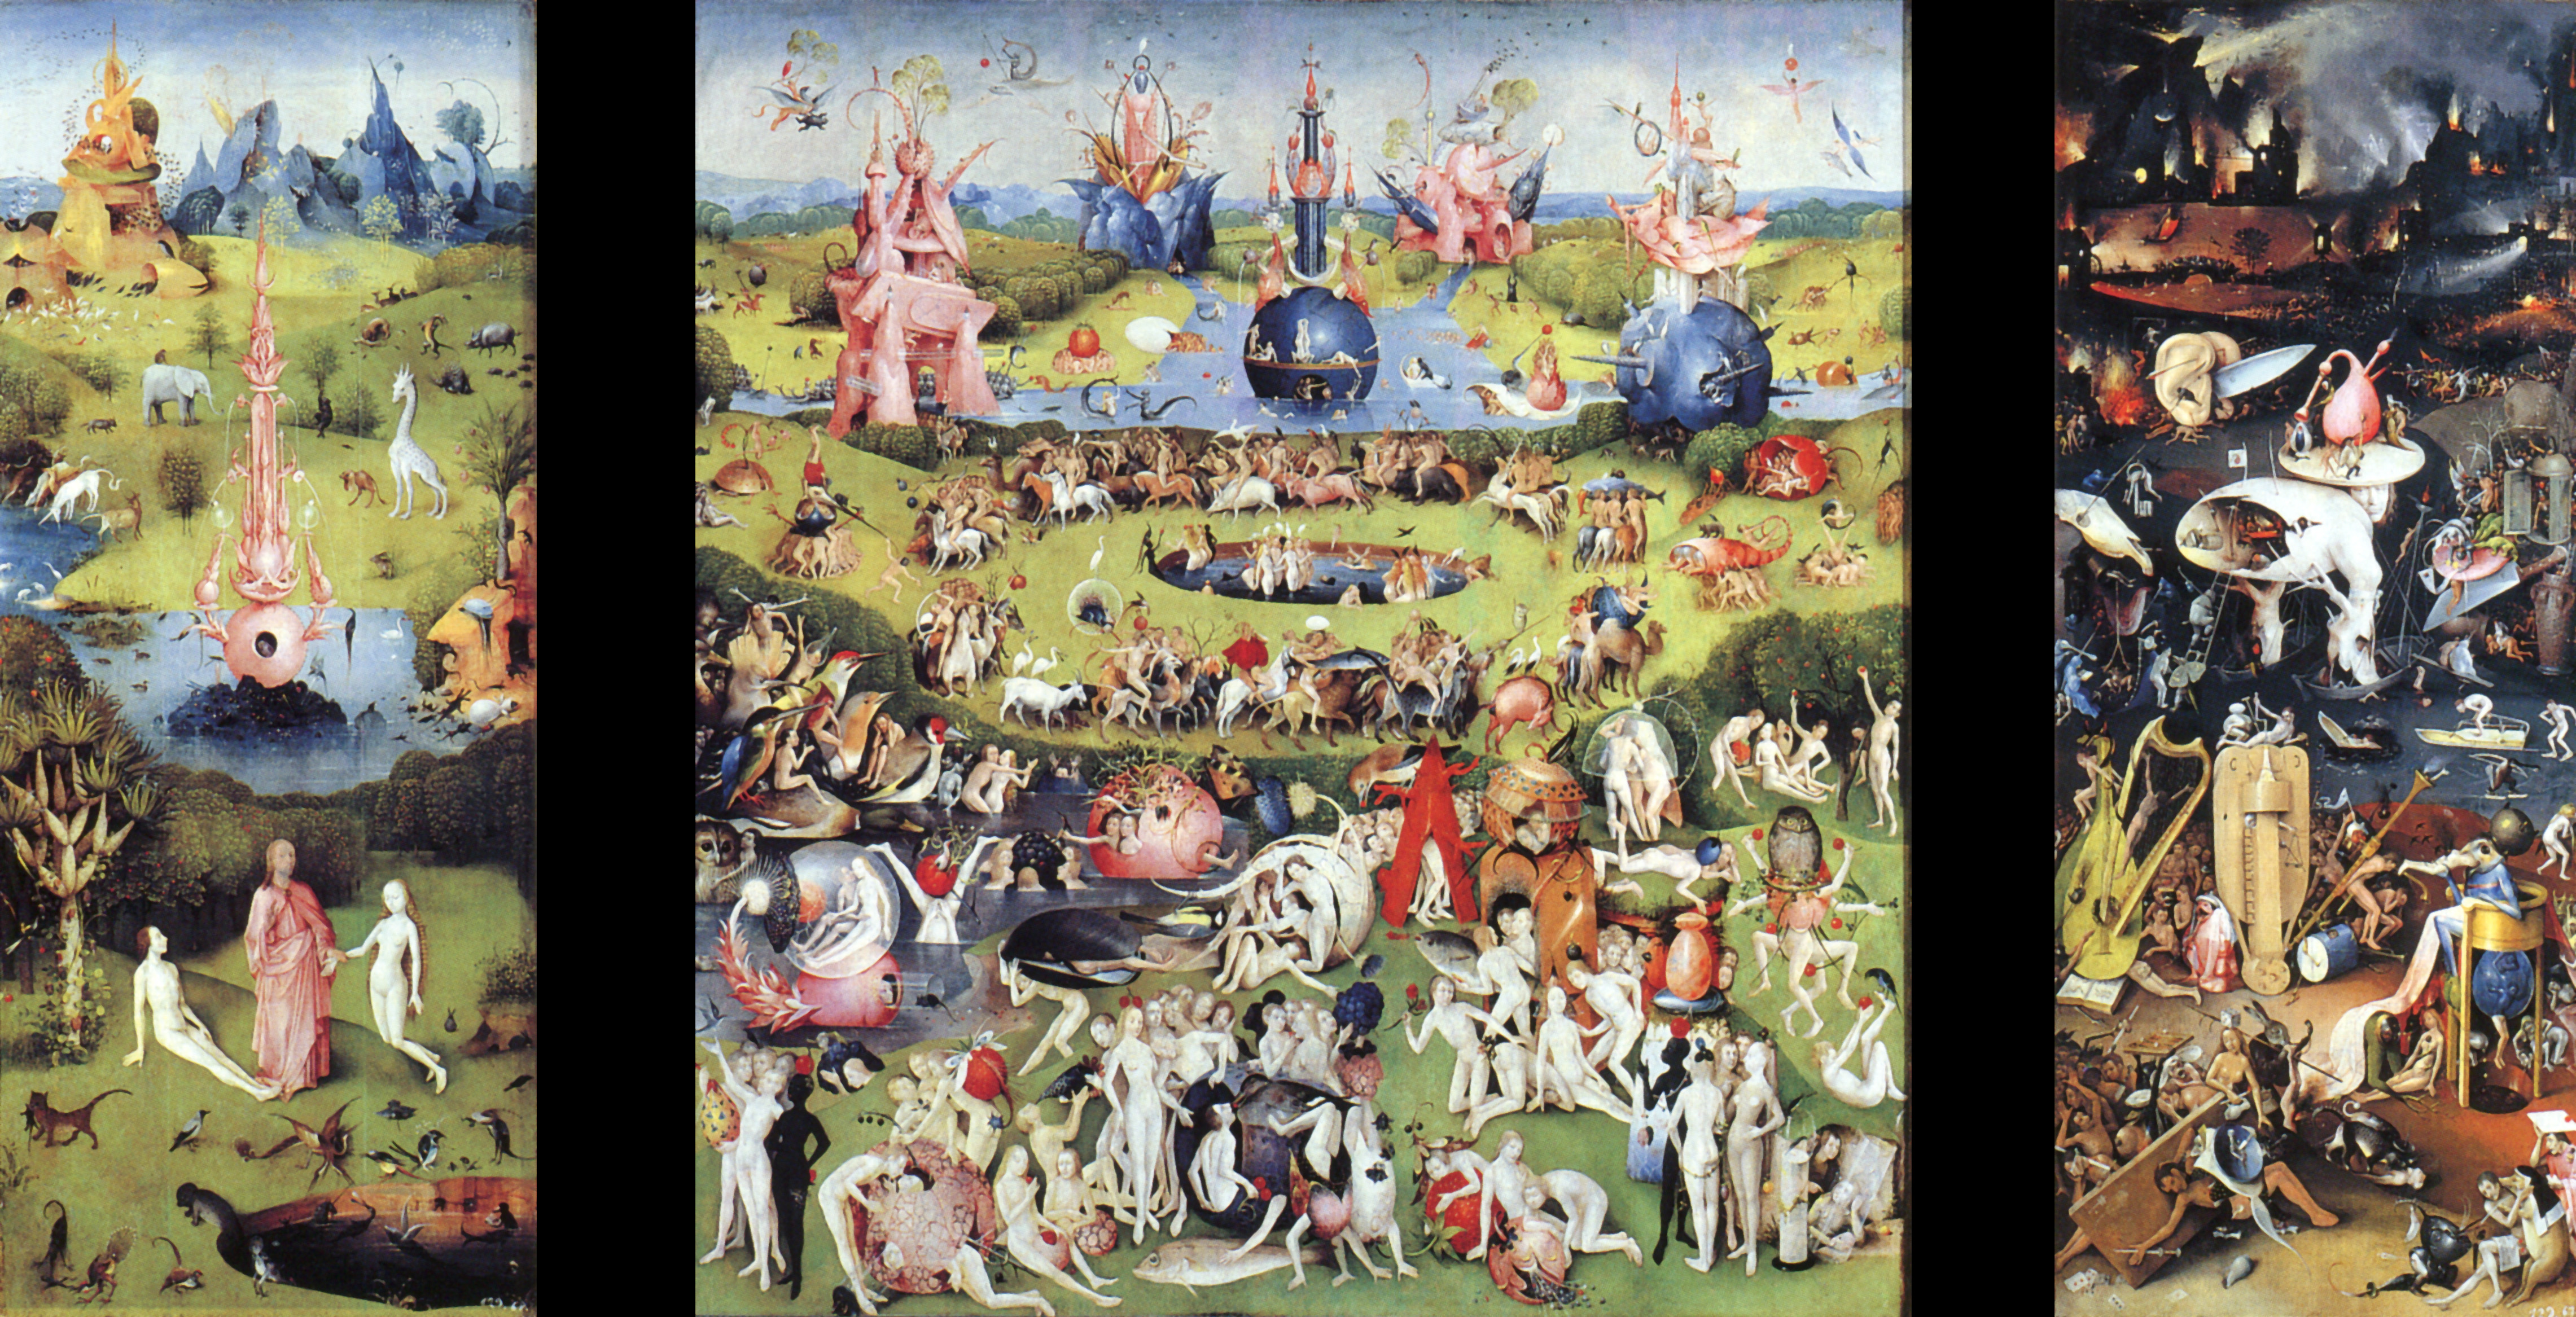 The_Garden_of_Earthly_Delights_by_Hieronymus_Bosch.jpg